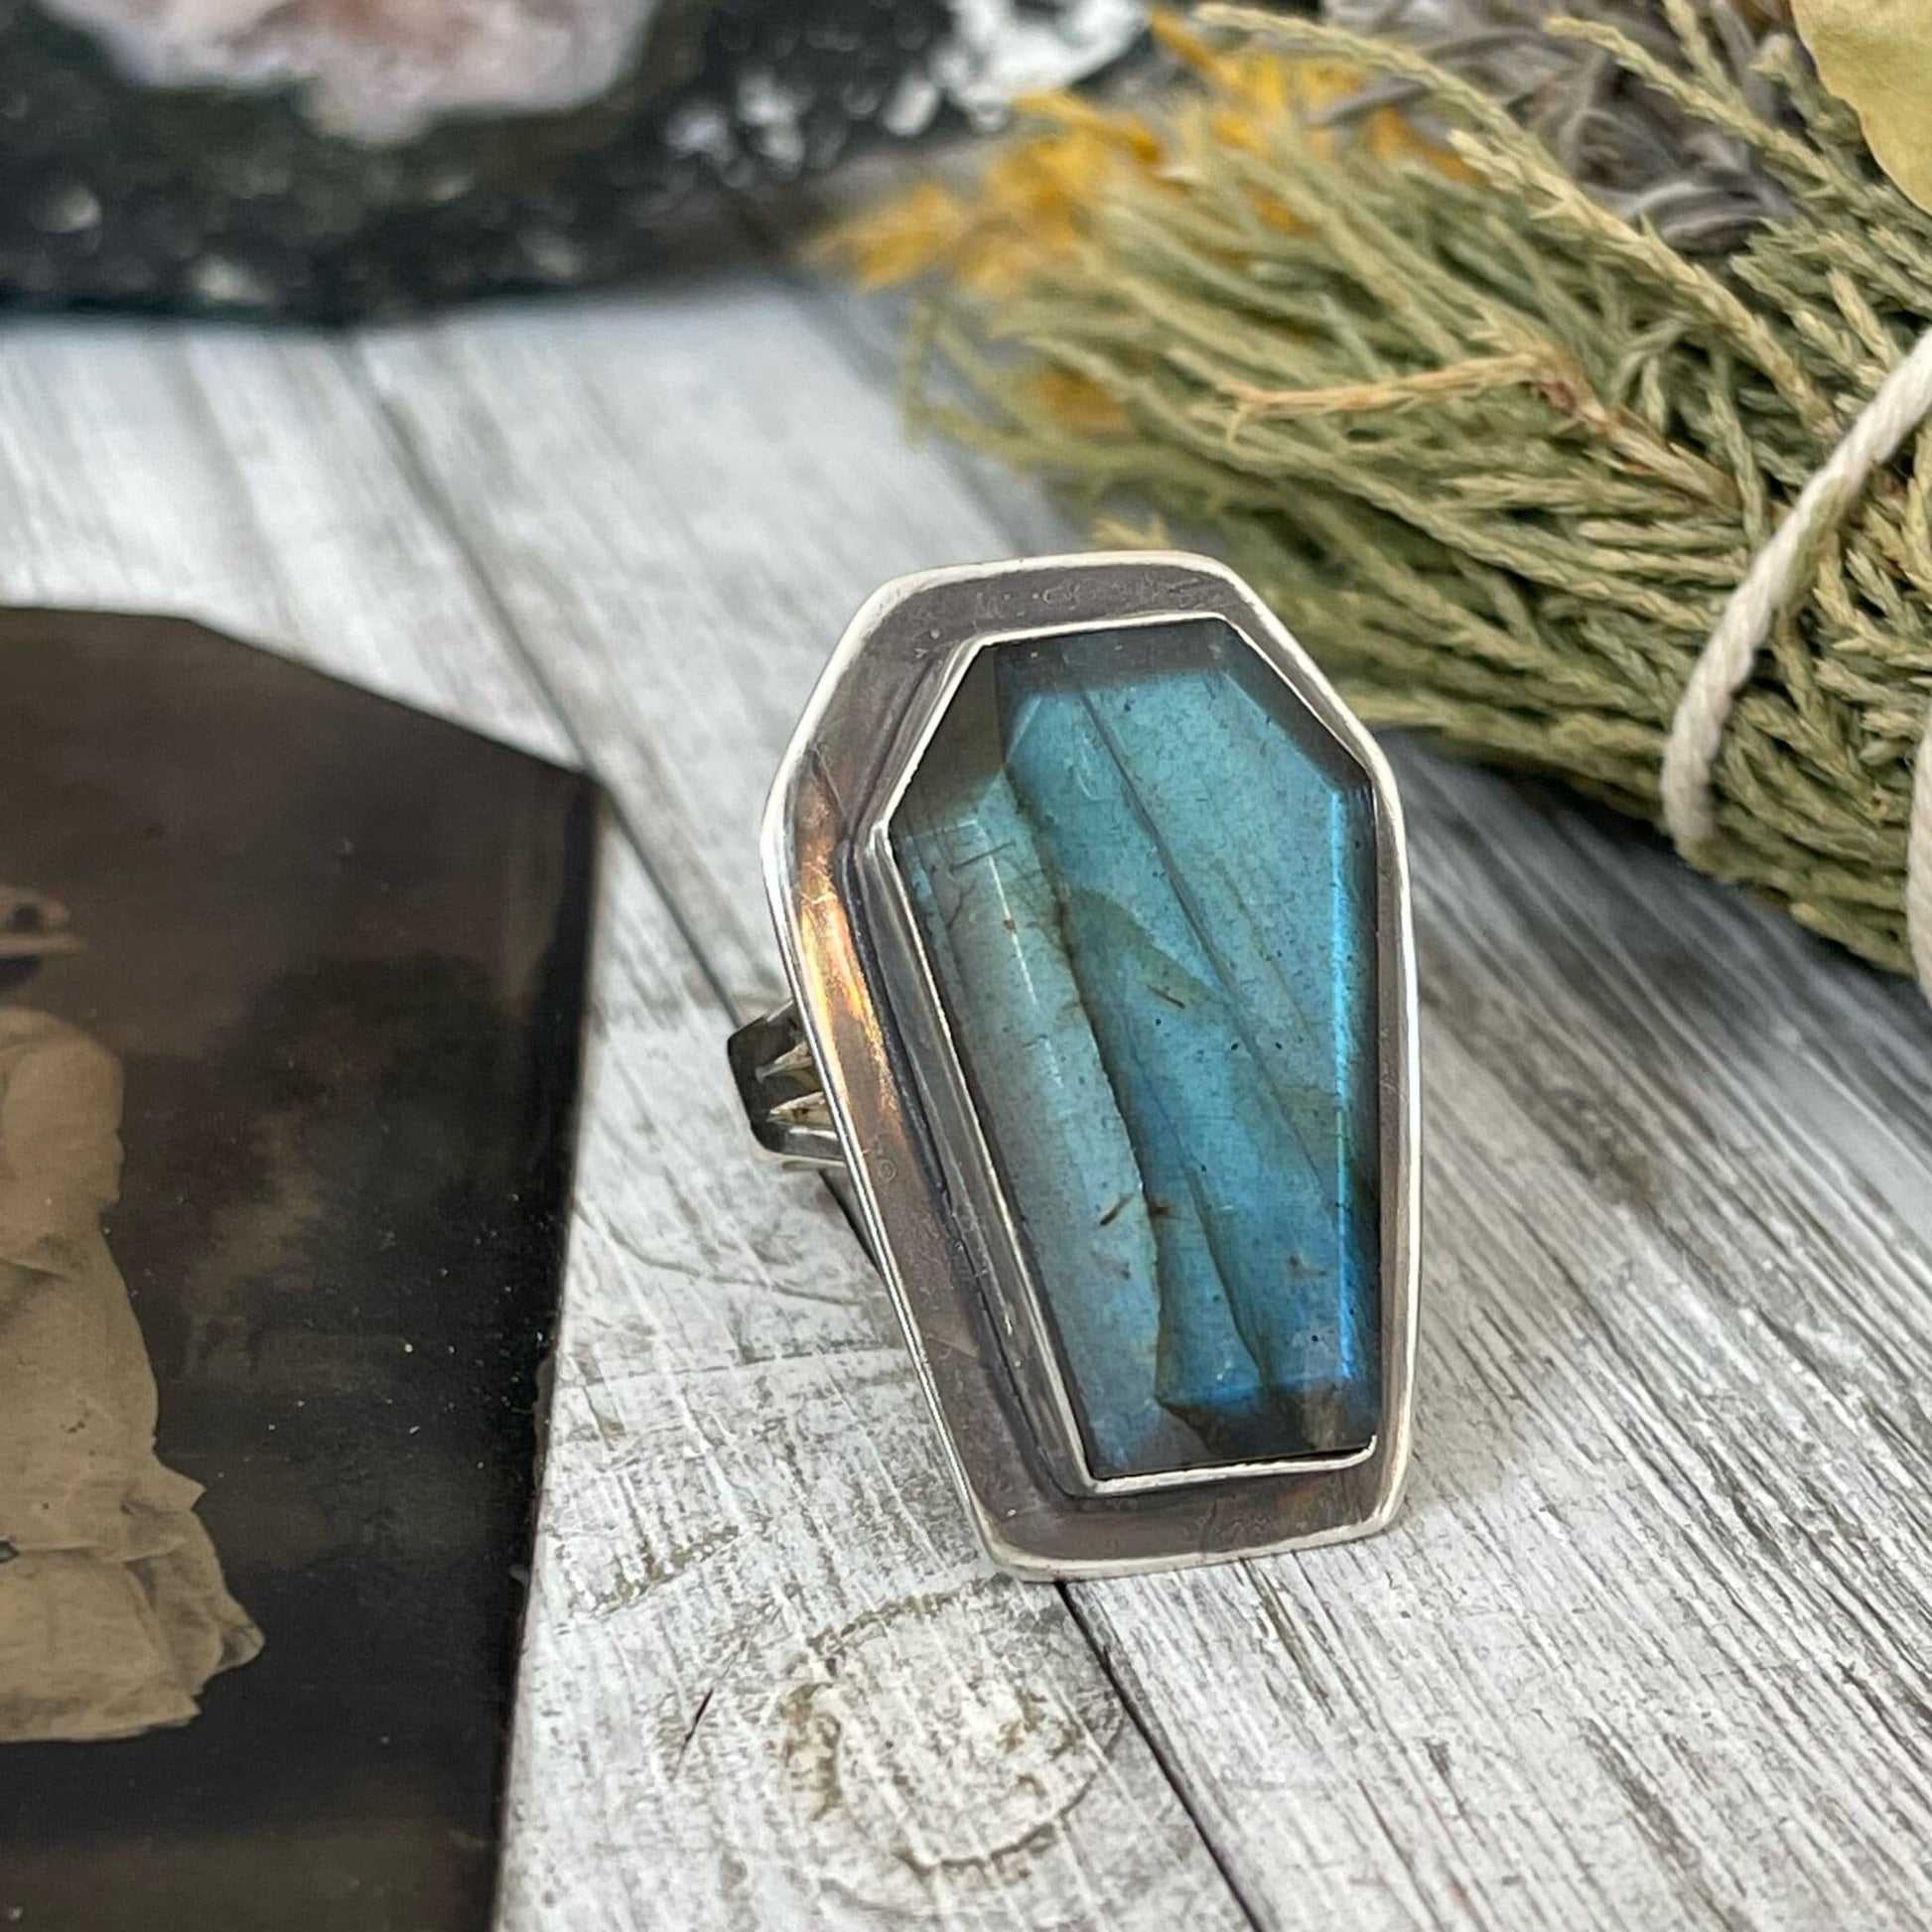 Coffin Jewelry, Coffin Ring, Crescent Moon, Crystal Ring, Etsy Id 1102370293, Foxlark Alchemy, FOXLARK- RINGS, Goth Jewelry, Gypsy Ring, Halloween Jewelry, Halloween Ring, Jewelry, Labradorite Ring, Rings, Statement Rings, Wholesale, Witch Jewelry